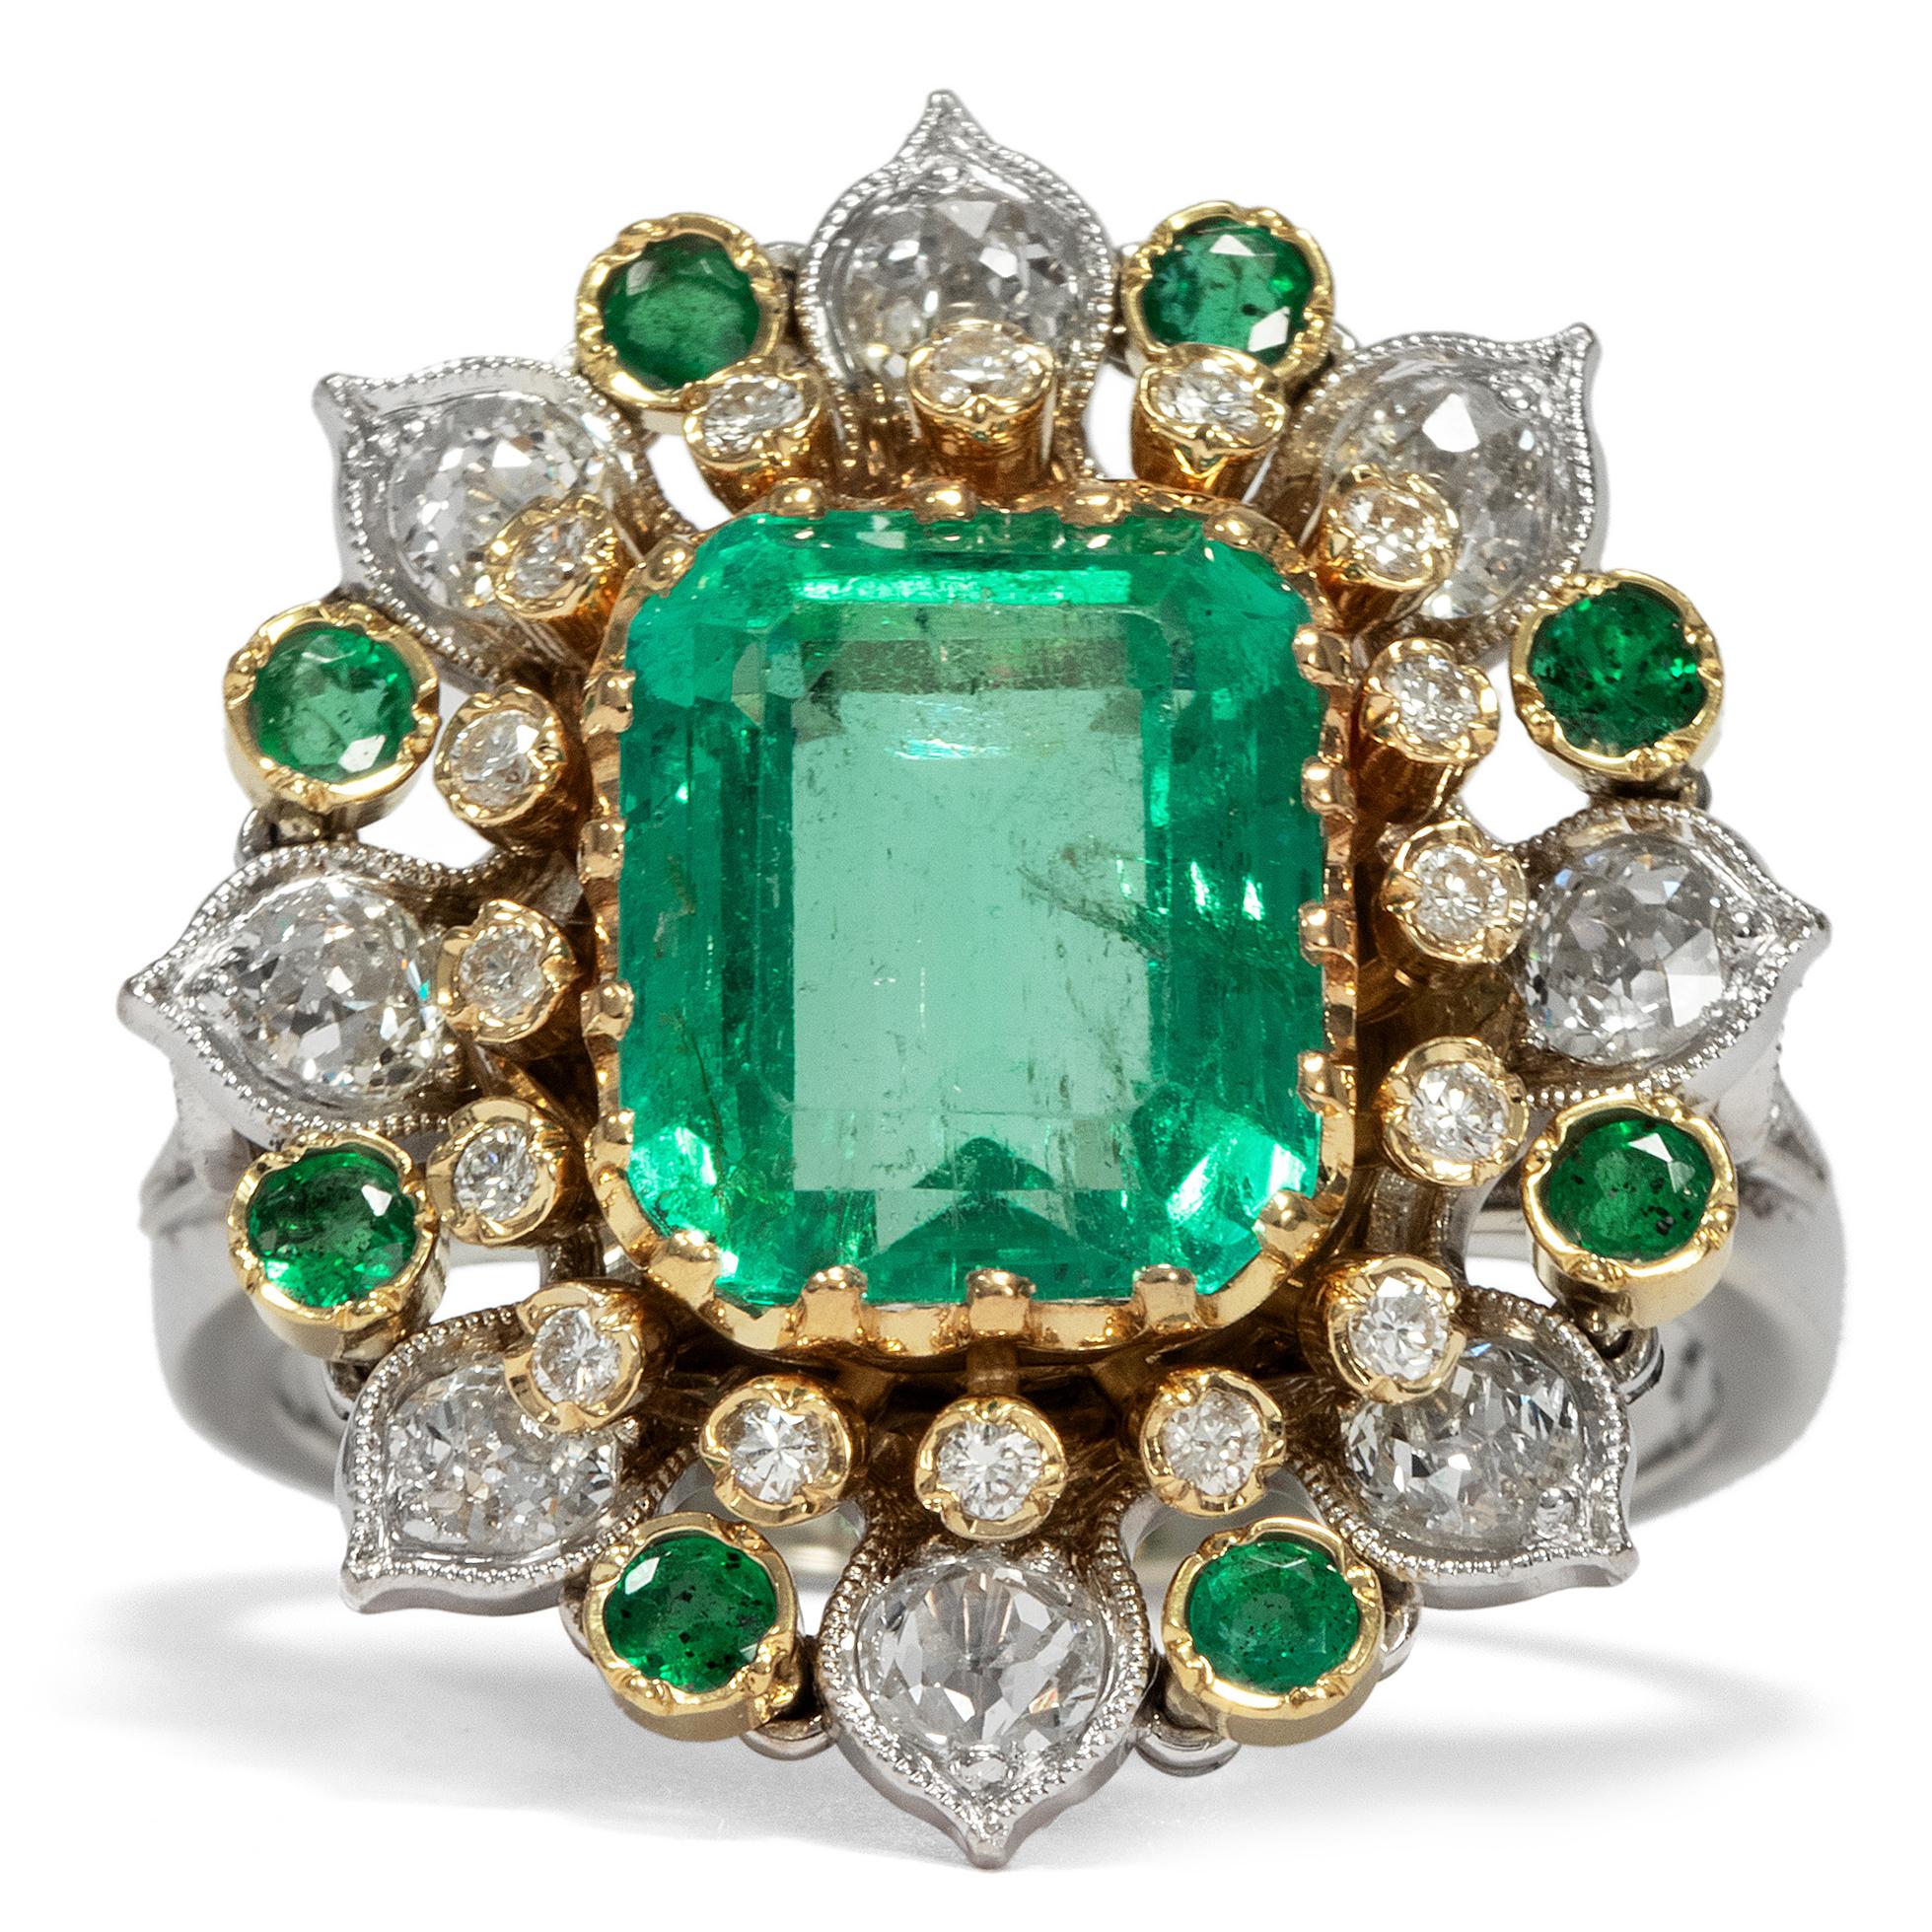 This spectacular vintage ring, dating to circa 1970, presents an excellent emerald of 3.5 ct weight in its centre. The gemstone is cut in the classic step cut, also known as emerald cut, and shows an intense green colour and beautiful transparency.